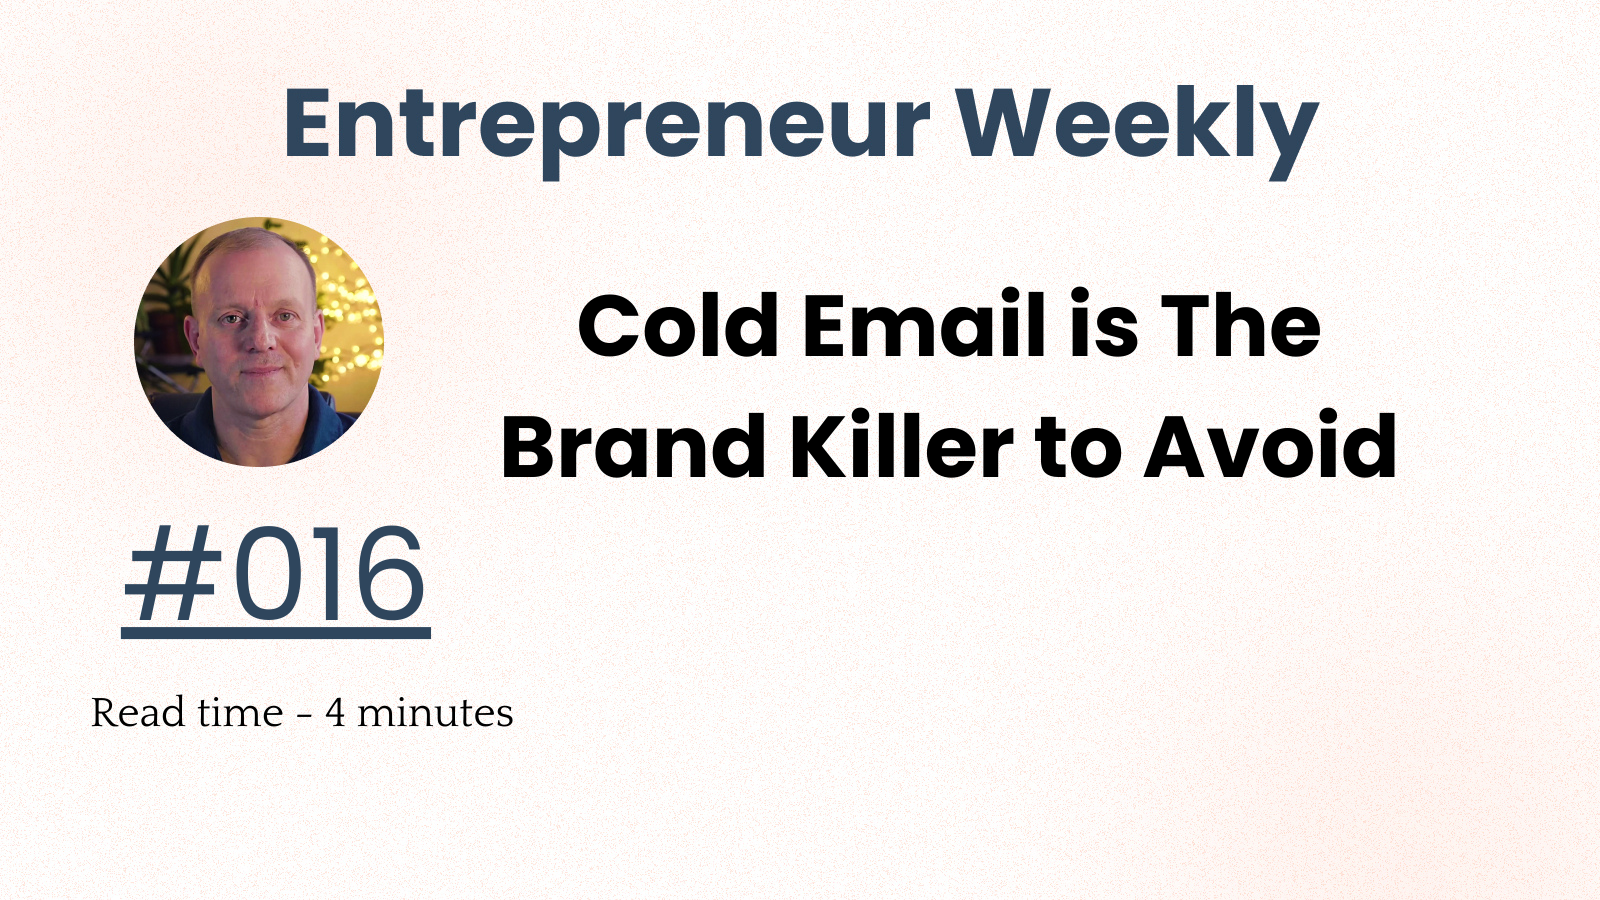 Cold Email is The Brand Killer to Avoid